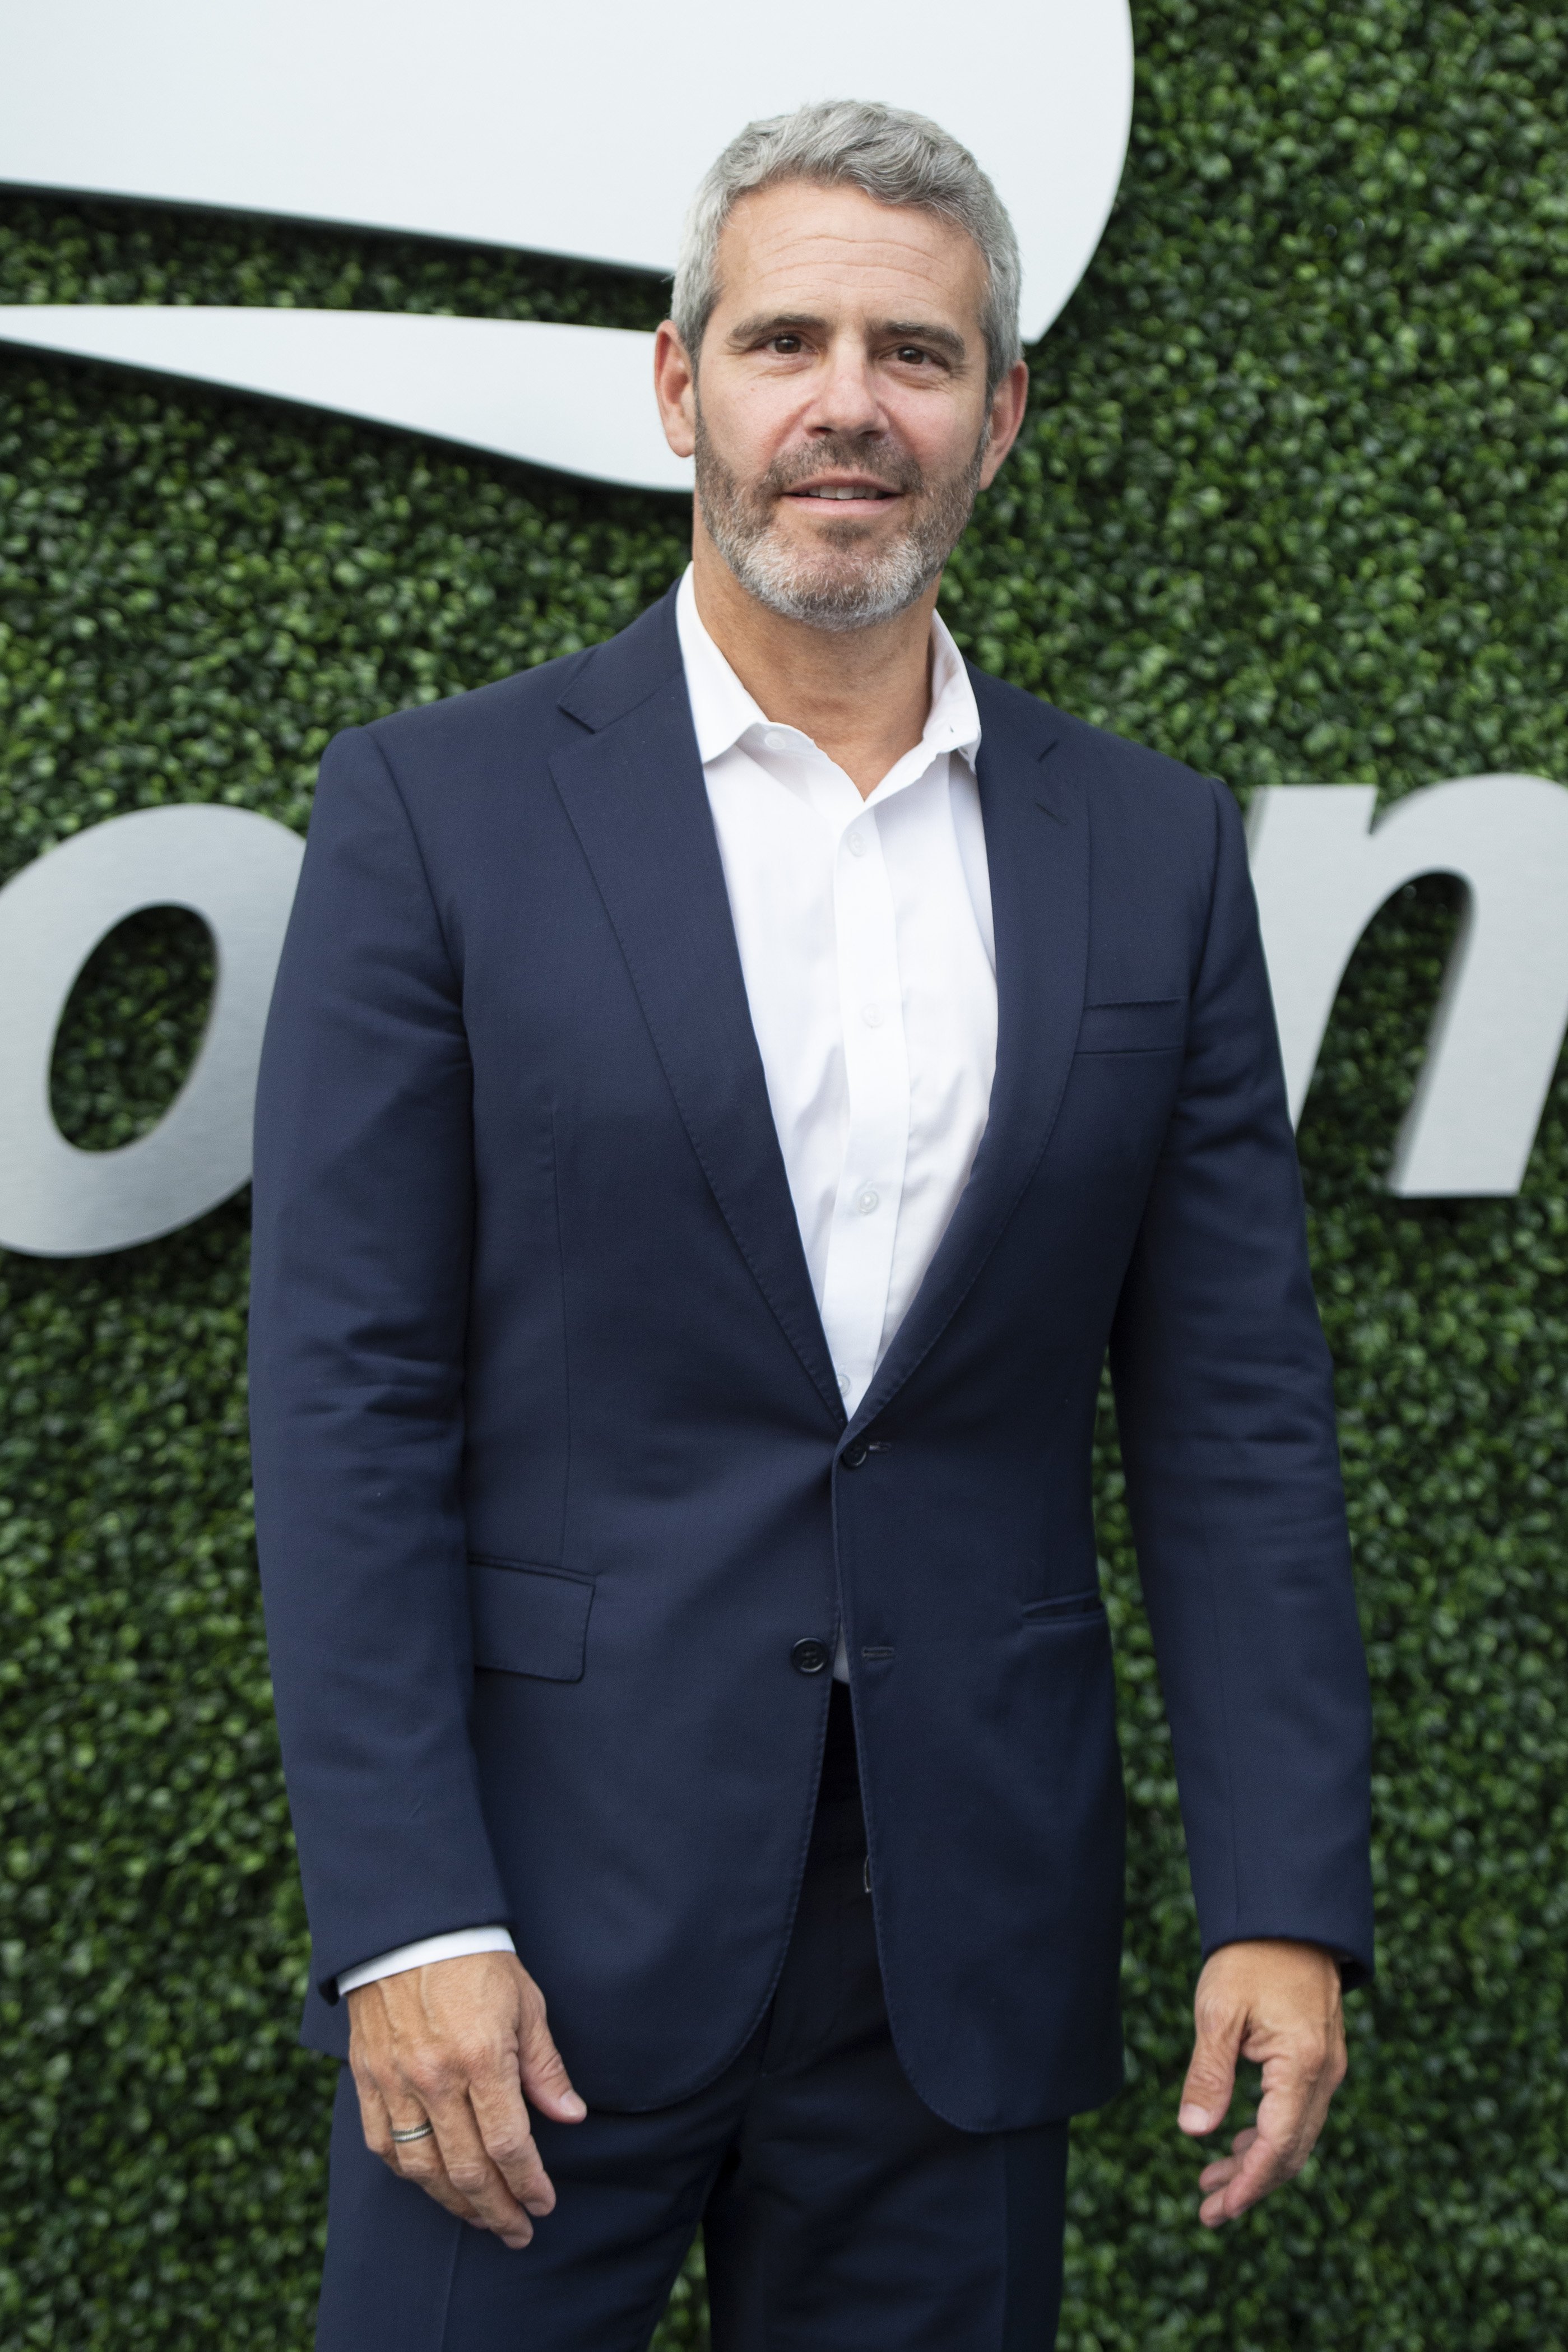 Andy Cohen at the US Open on September 5, 2019 in New York City | Photo: Getty Images